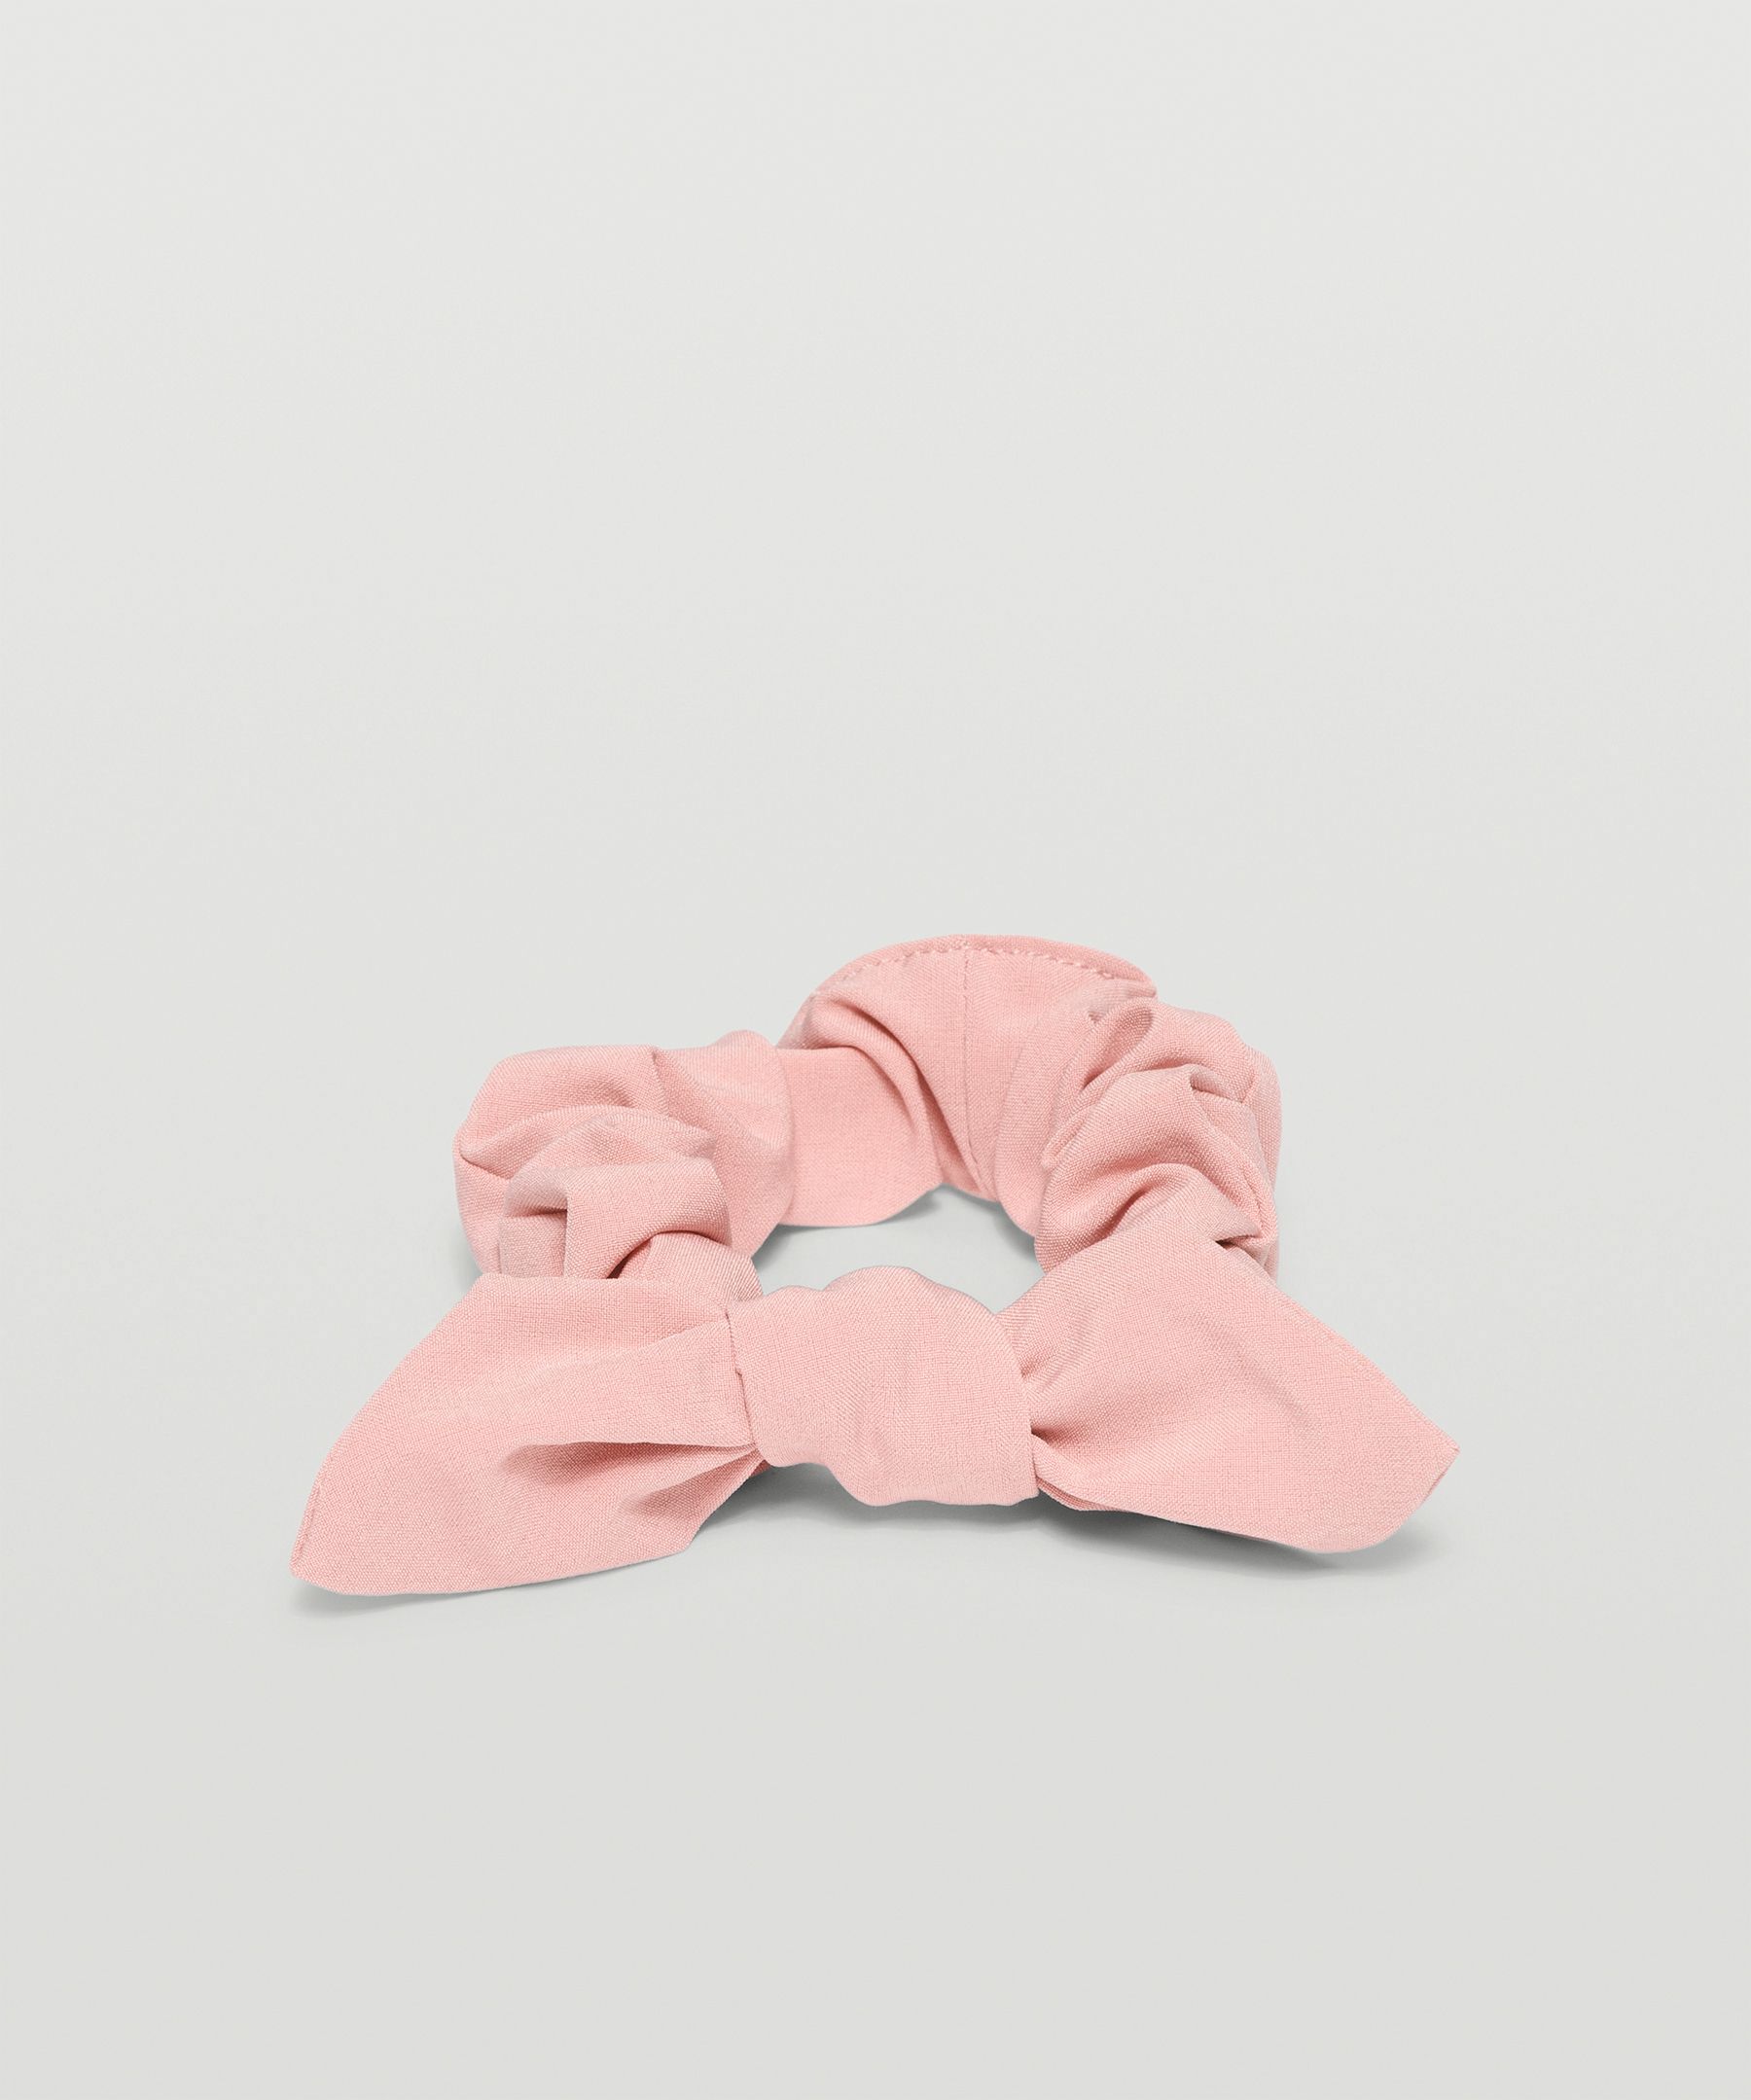 Lululemon Uplifting Scrunchie Bow In Pink Puff